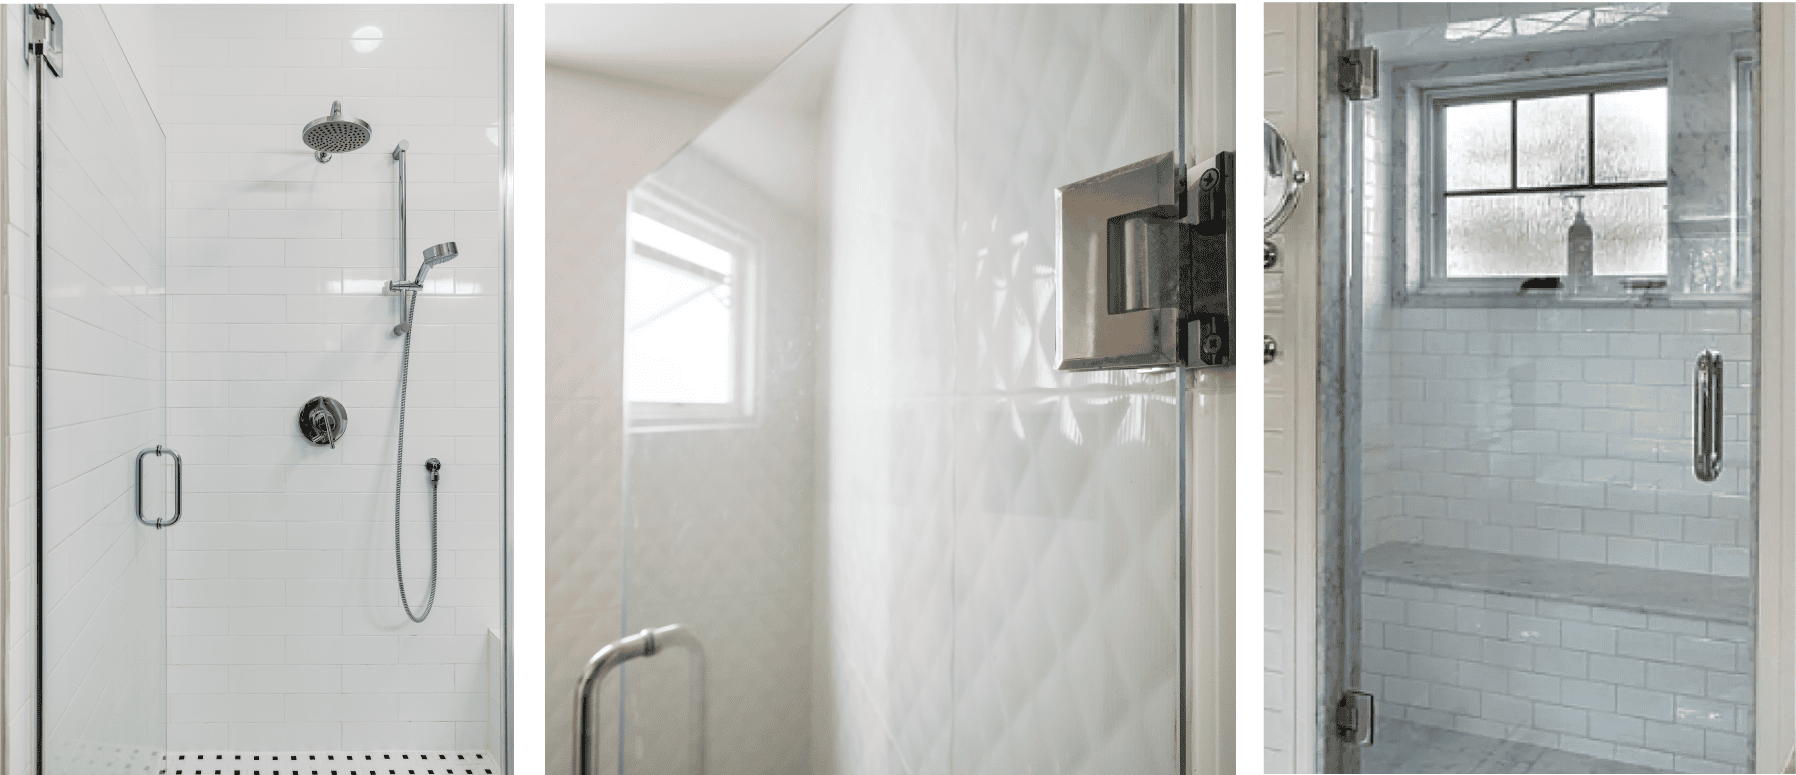 Glass shower doors in four different designs and hardware finishes